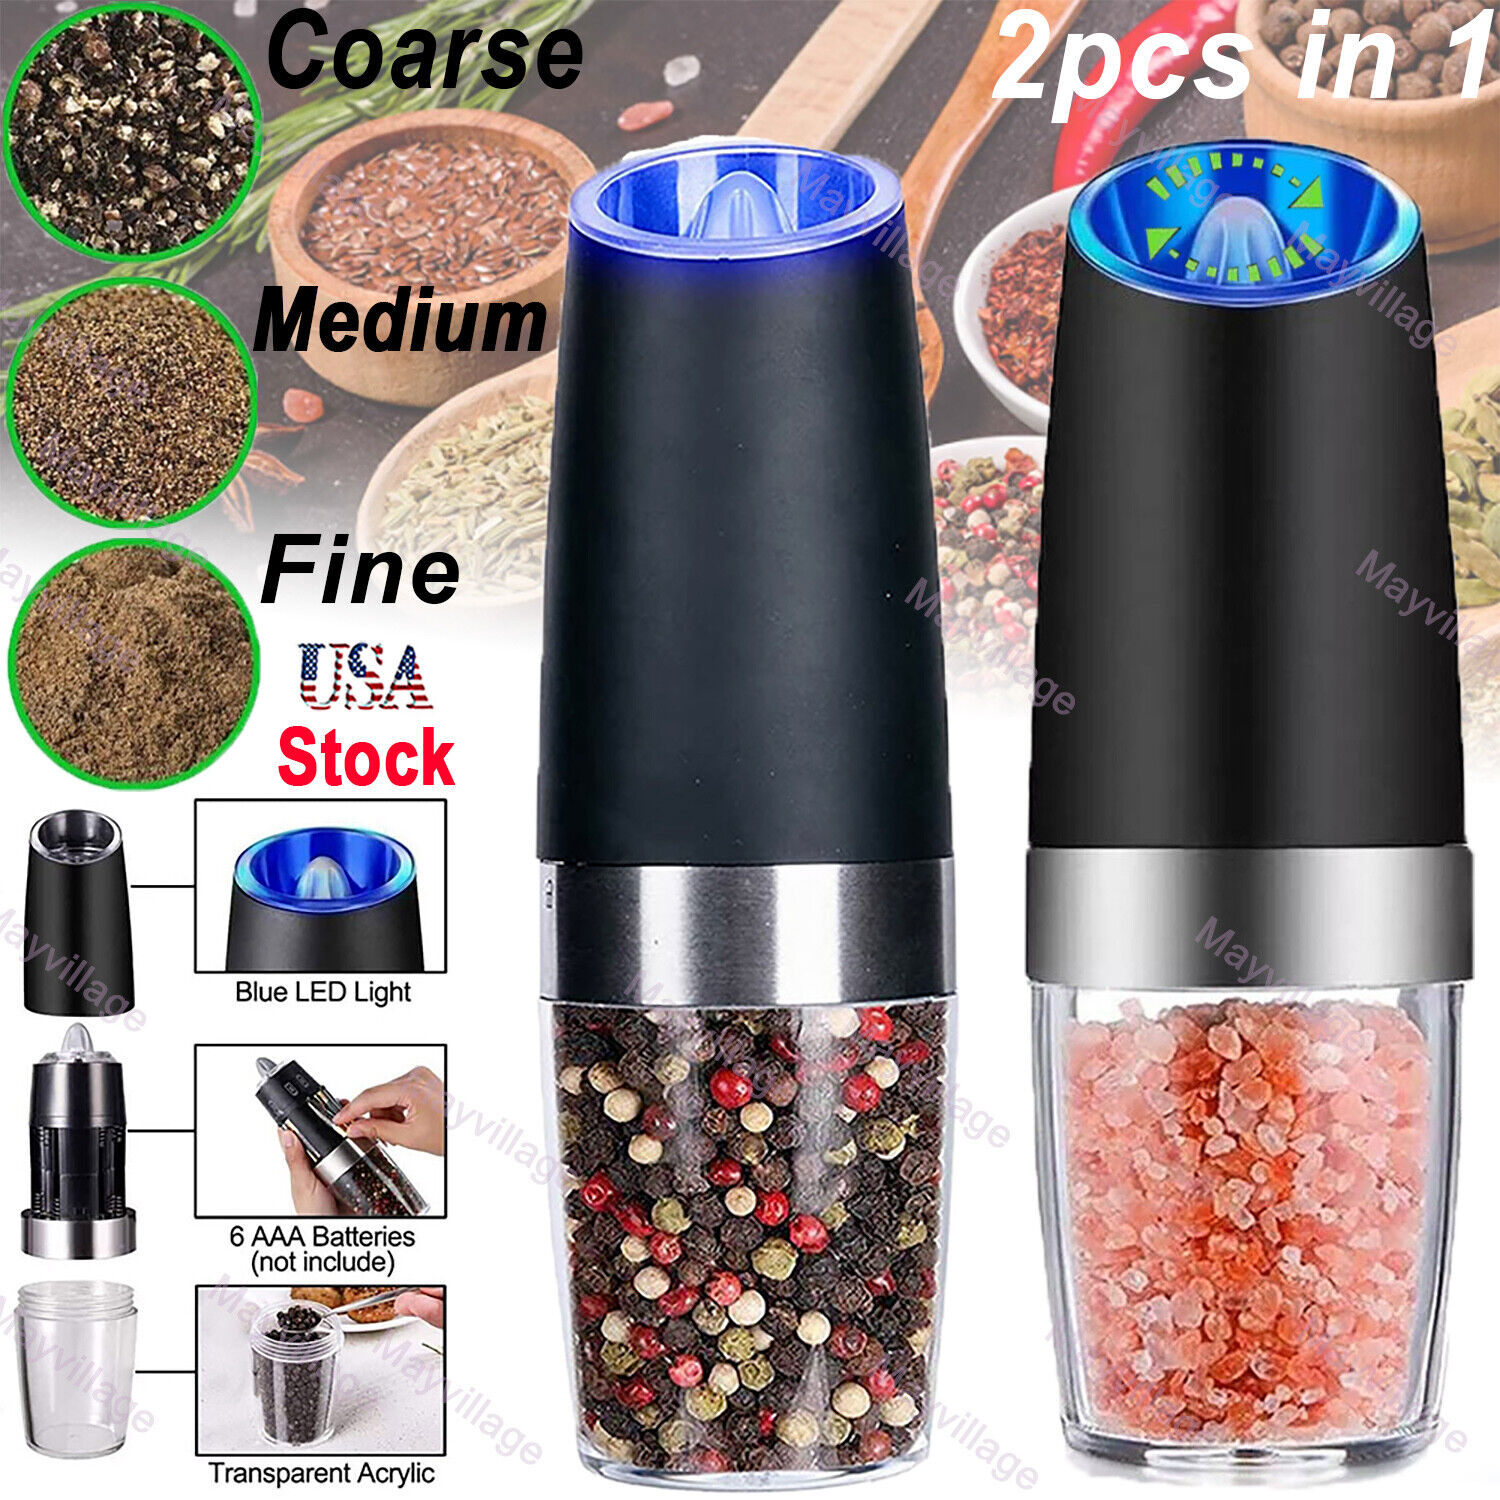 2 pcs Gravity Electric Salt and Pepper Grinder Mill Shakers Adjustable Automatic